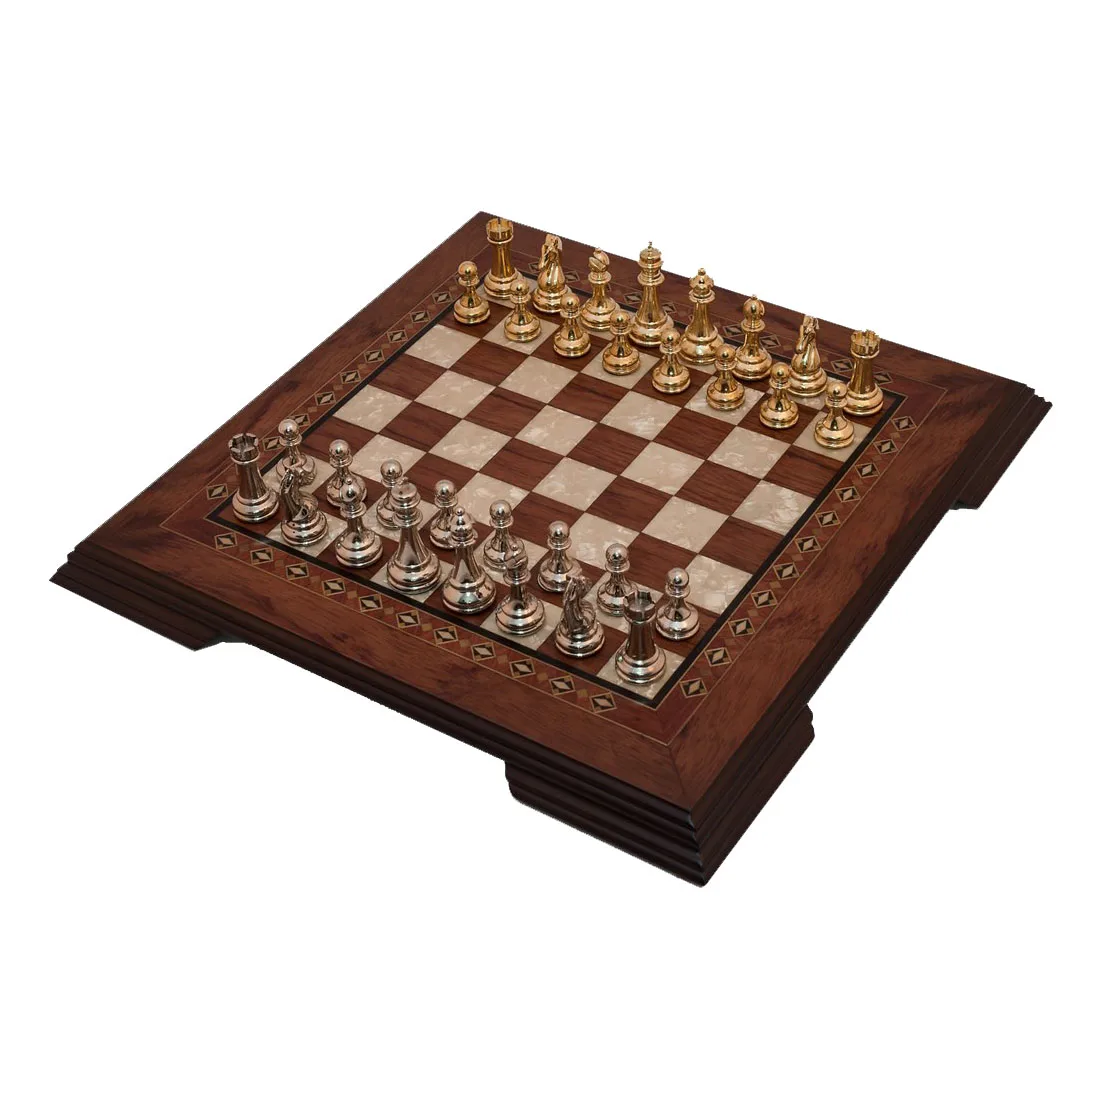 Solid Walnut Wood Chess Game Set - With Metal Figure - Footed Mosaic Engraved Chessboard Gift Items Шахматы шахматы учитесь у чемпионов хансен л